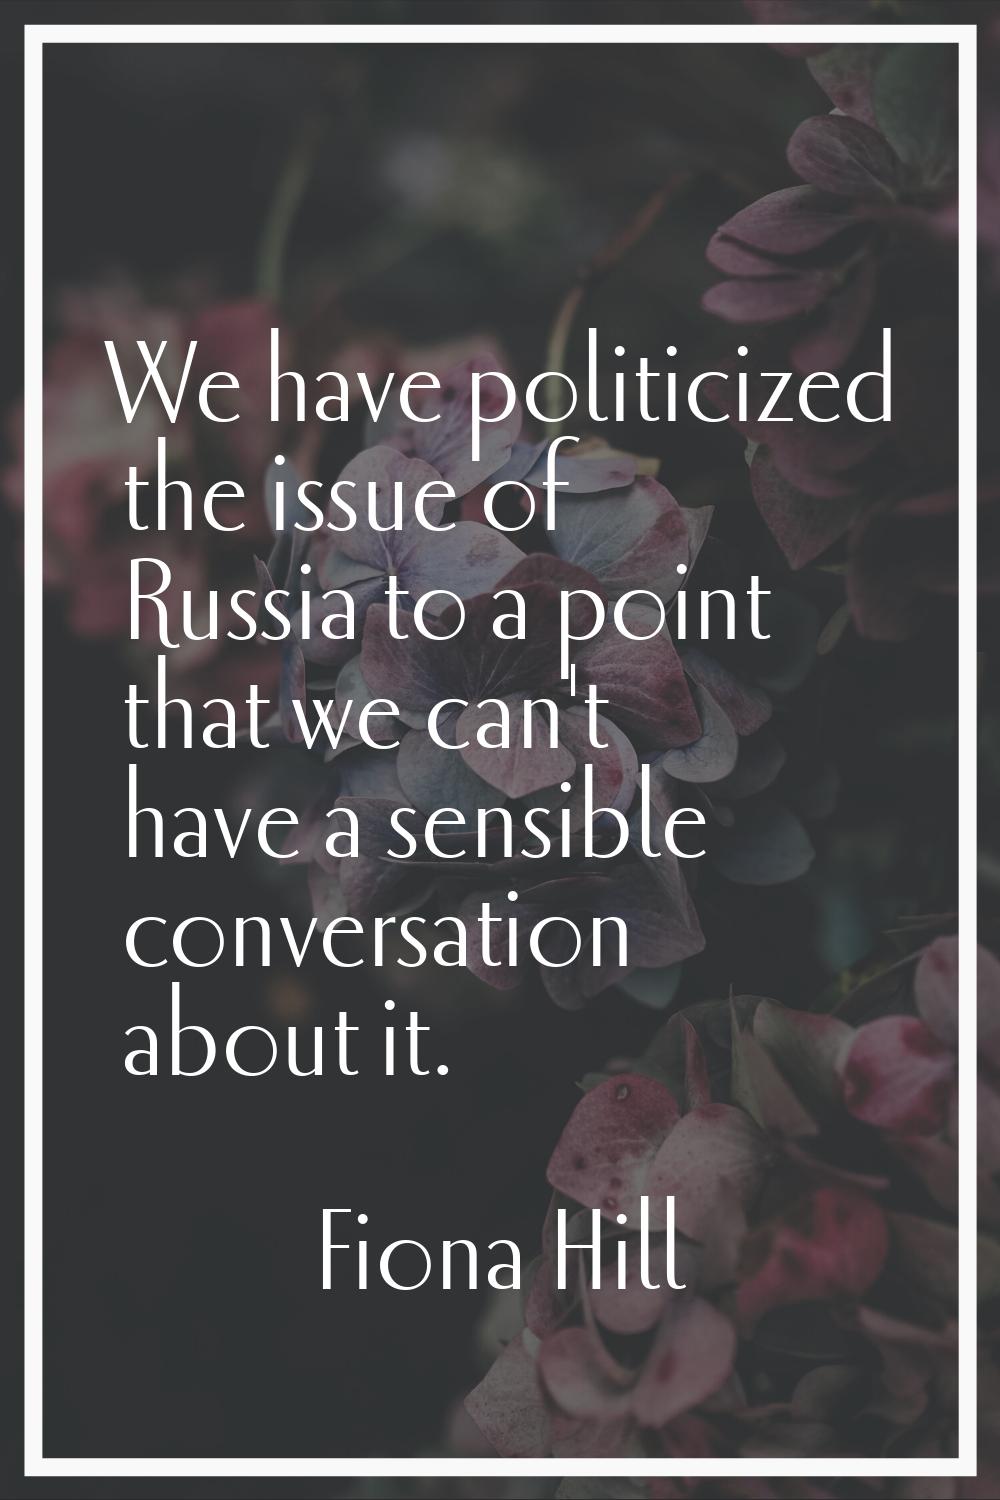 We have politicized the issue of Russia to a point that we can't have a sensible conversation about